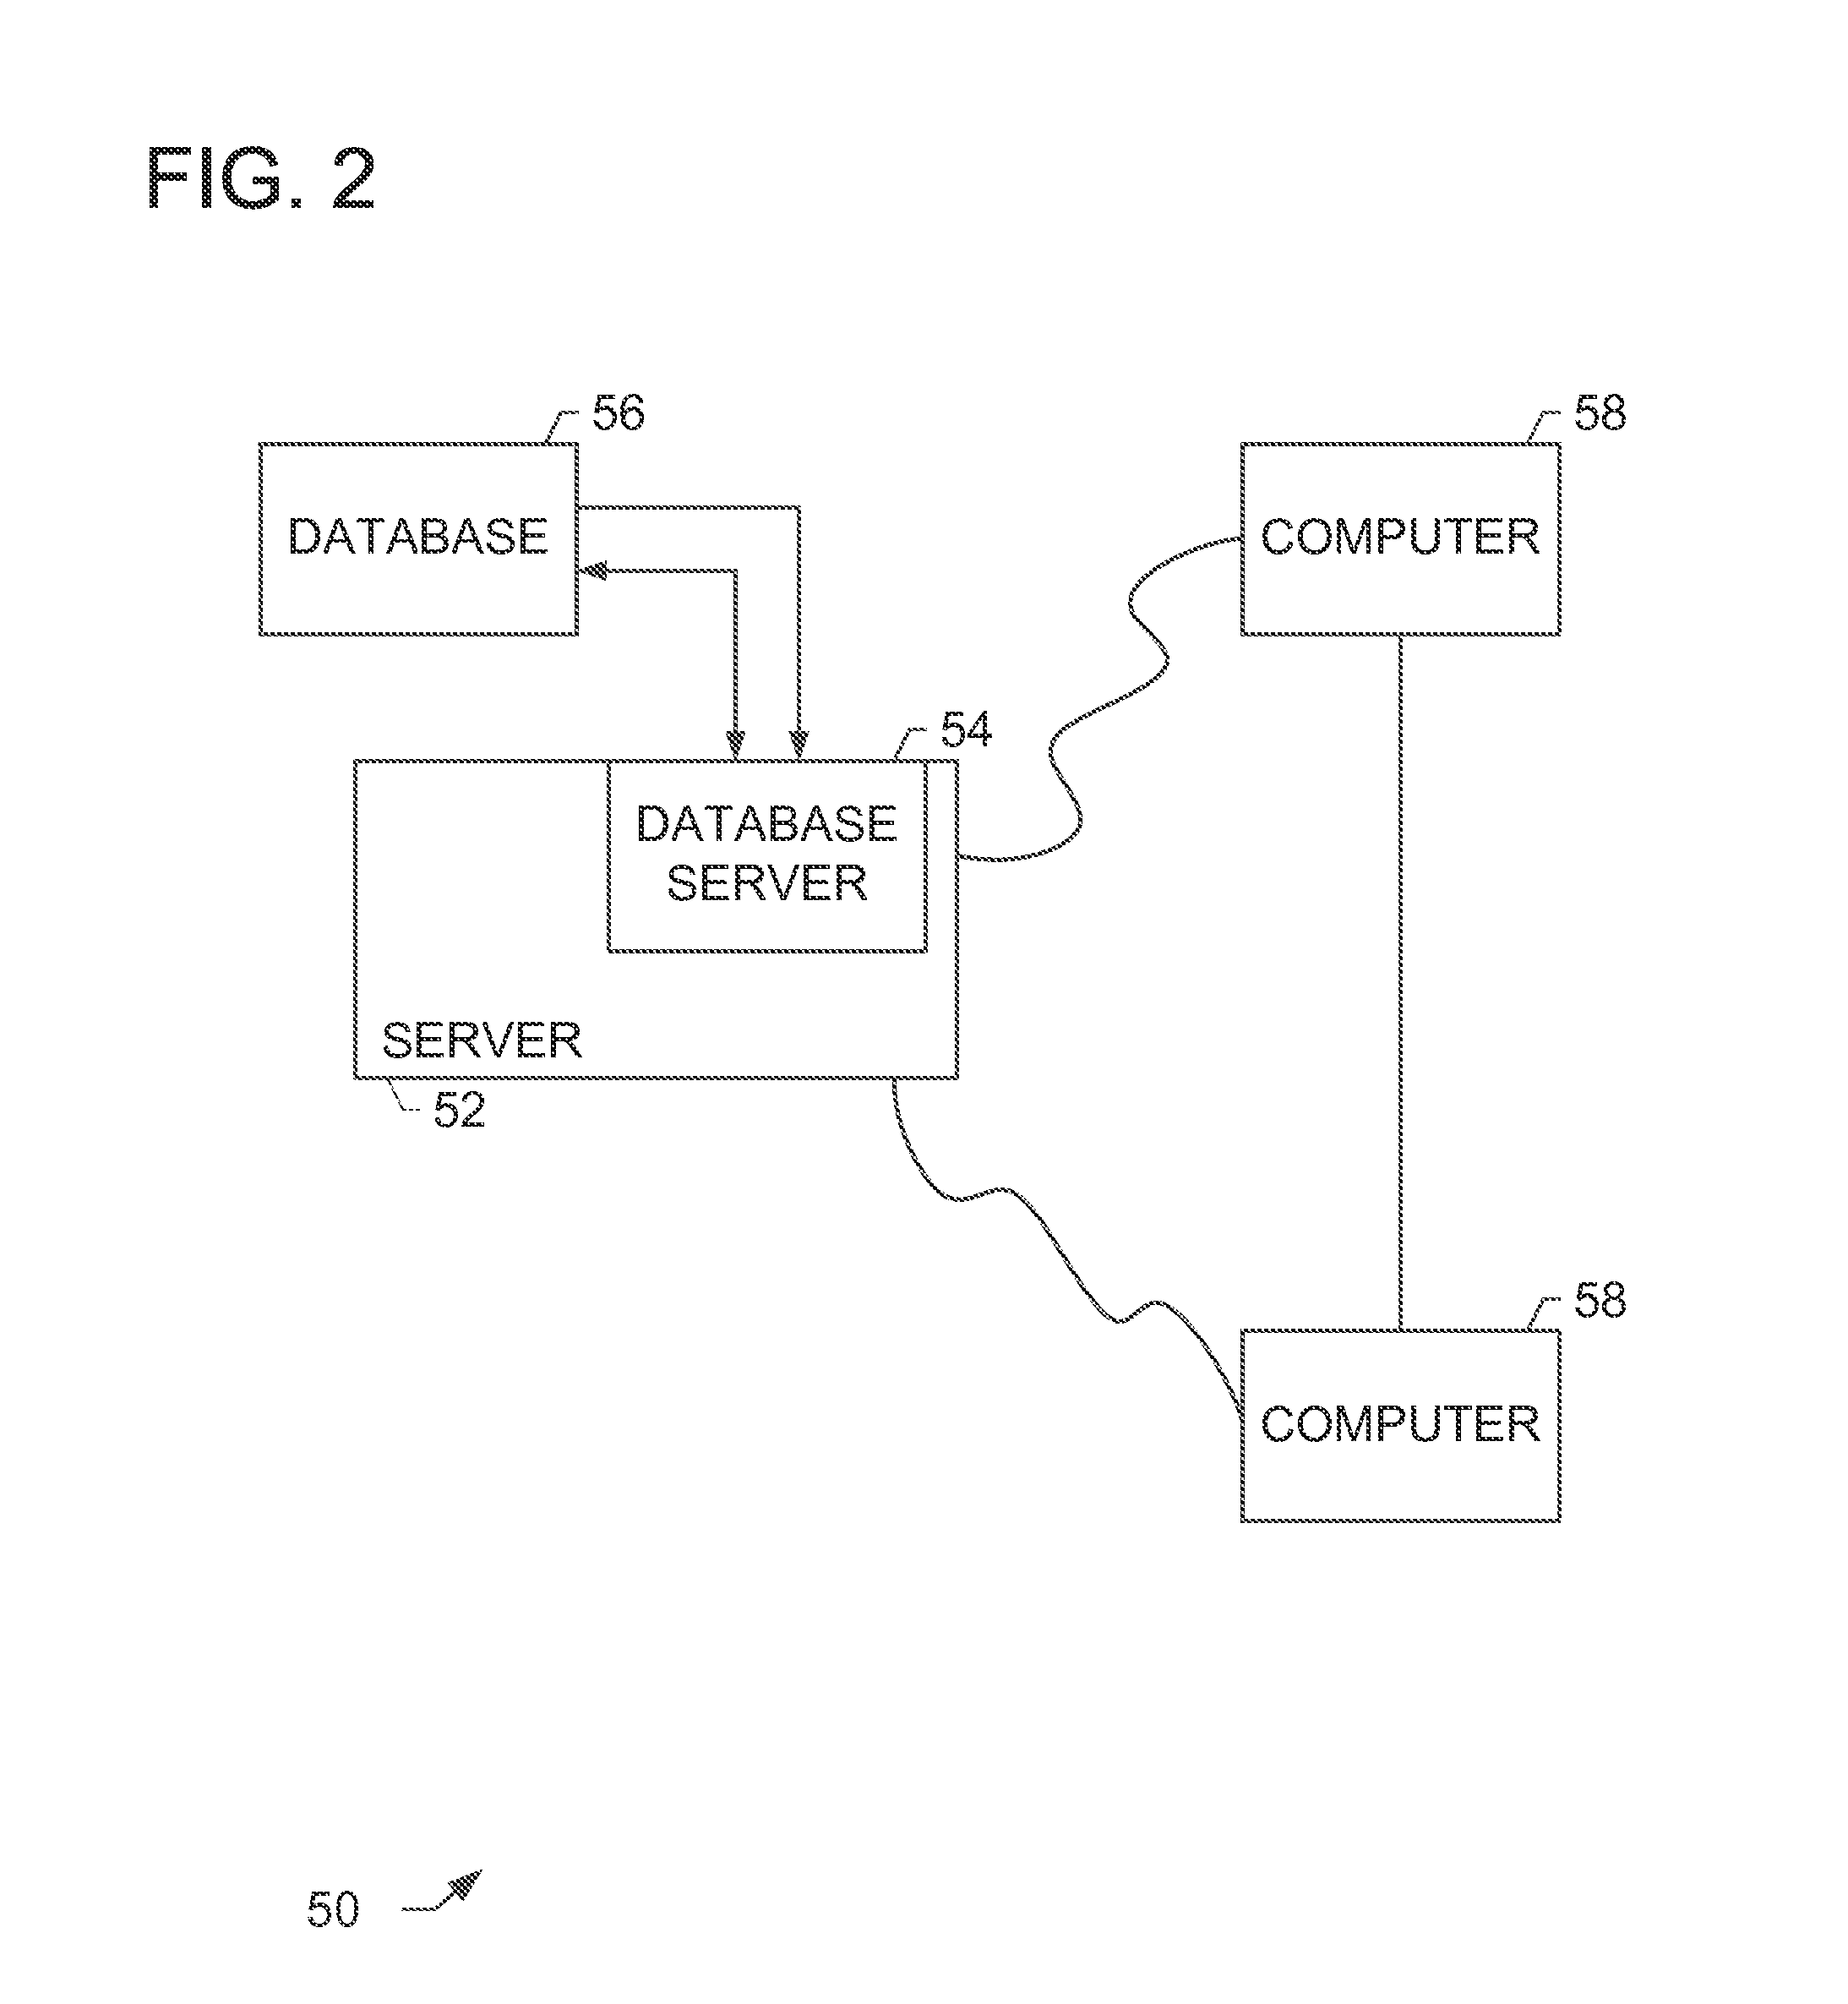 Systems and methods for enhanced use of data in agriculture management